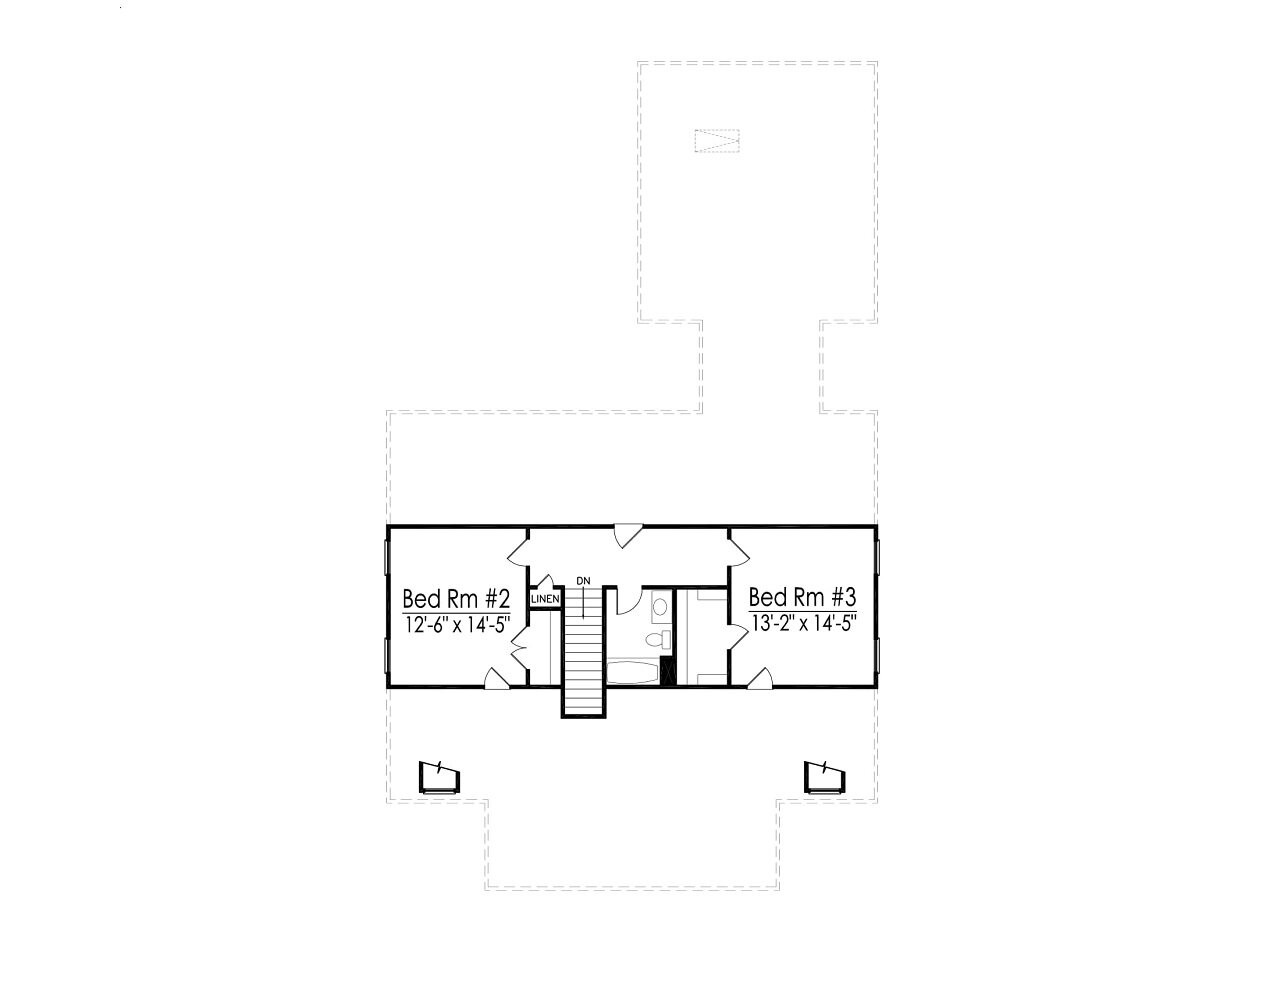 Secondary Image - Classic House Plan - 27581 - 2nd Floor Plan